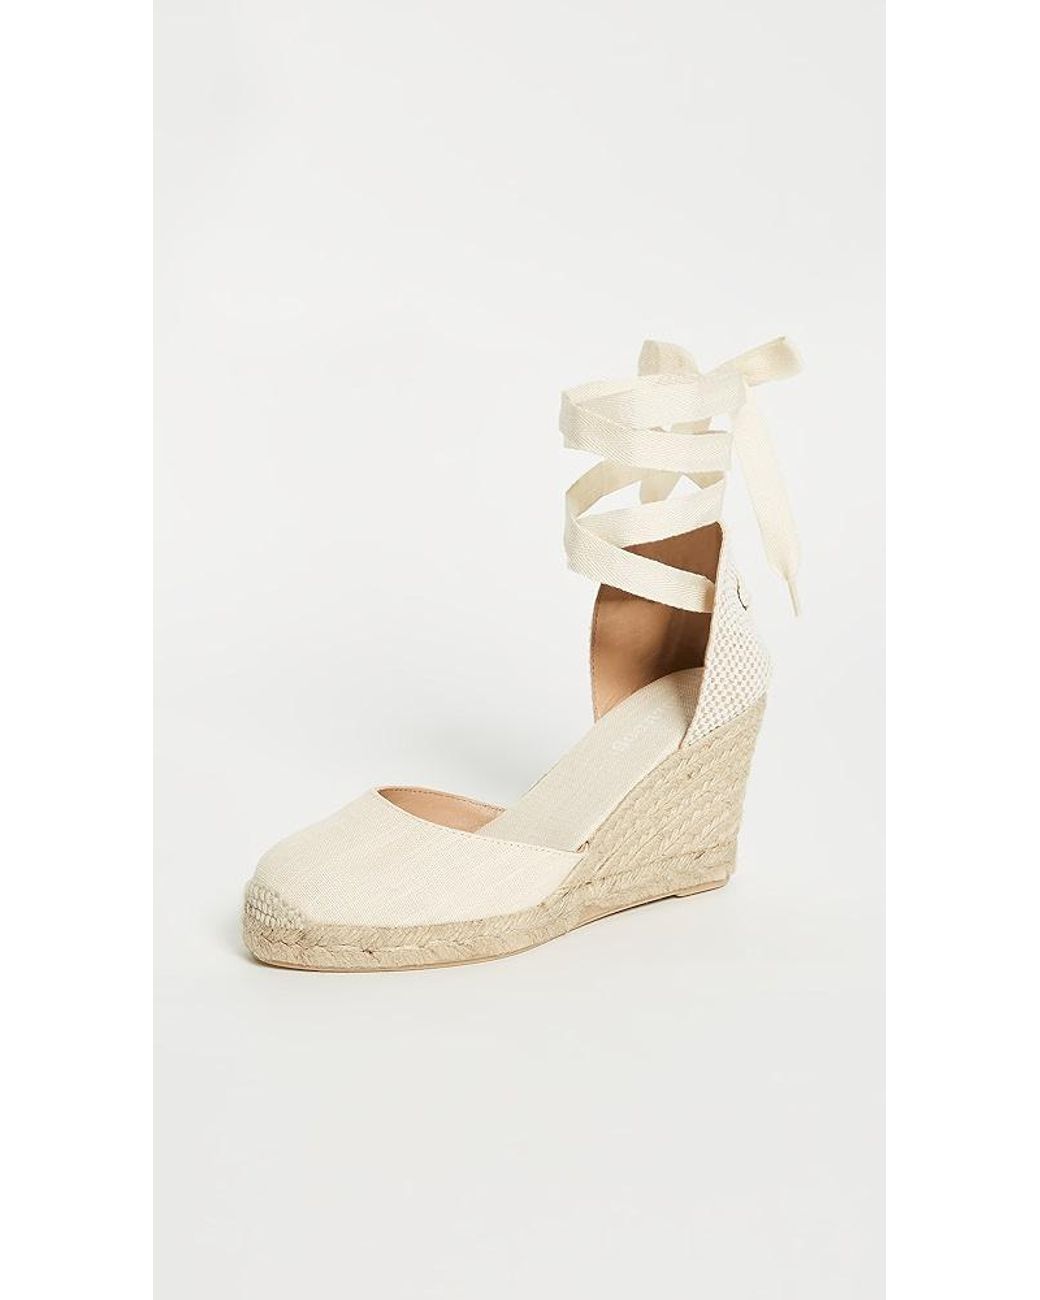 Soludos Tall Wedge Espadrilles | Lyst